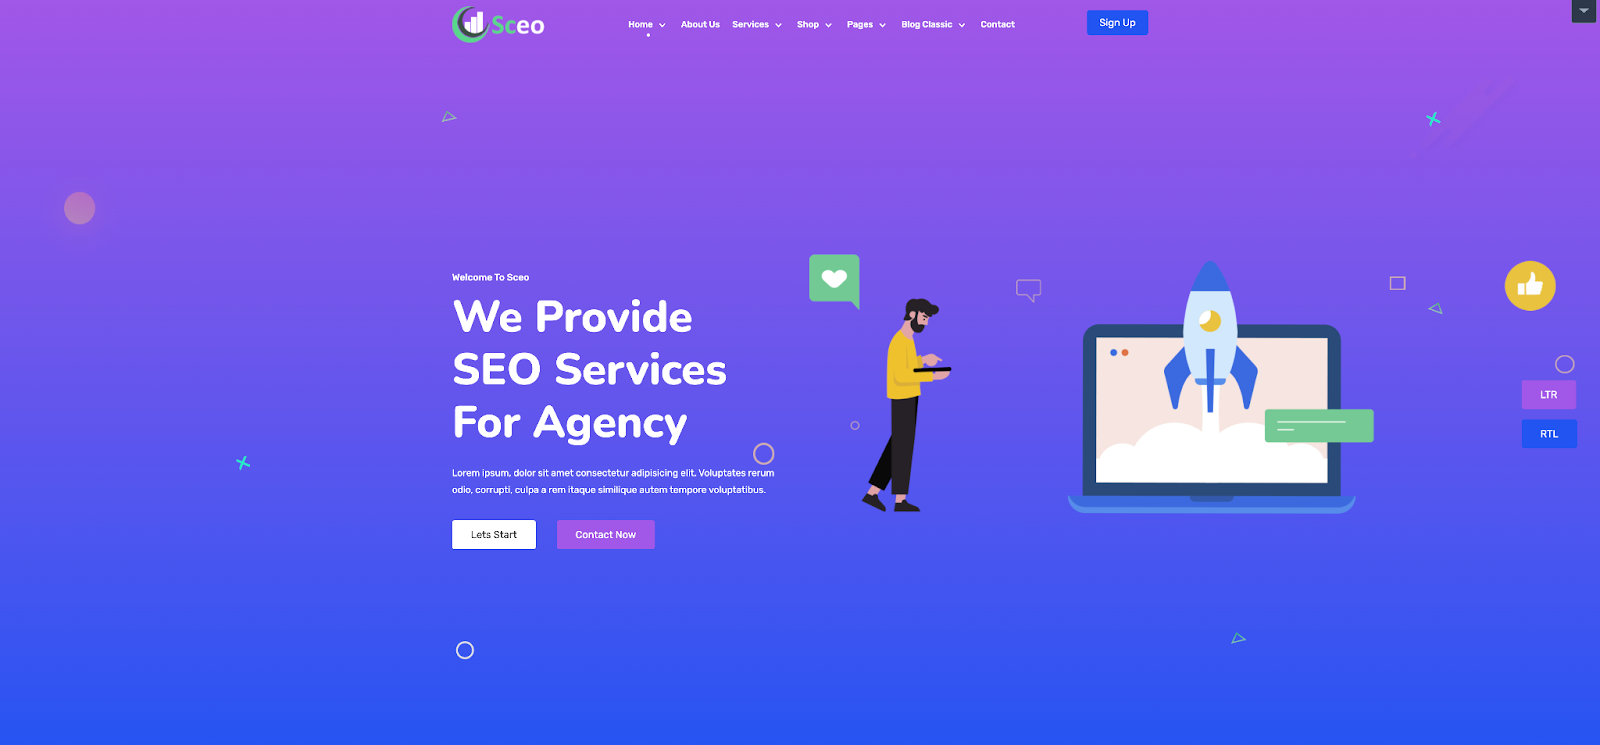 Sceo is an agency-focused WordPress theme will give you everything you need to start a blog or business